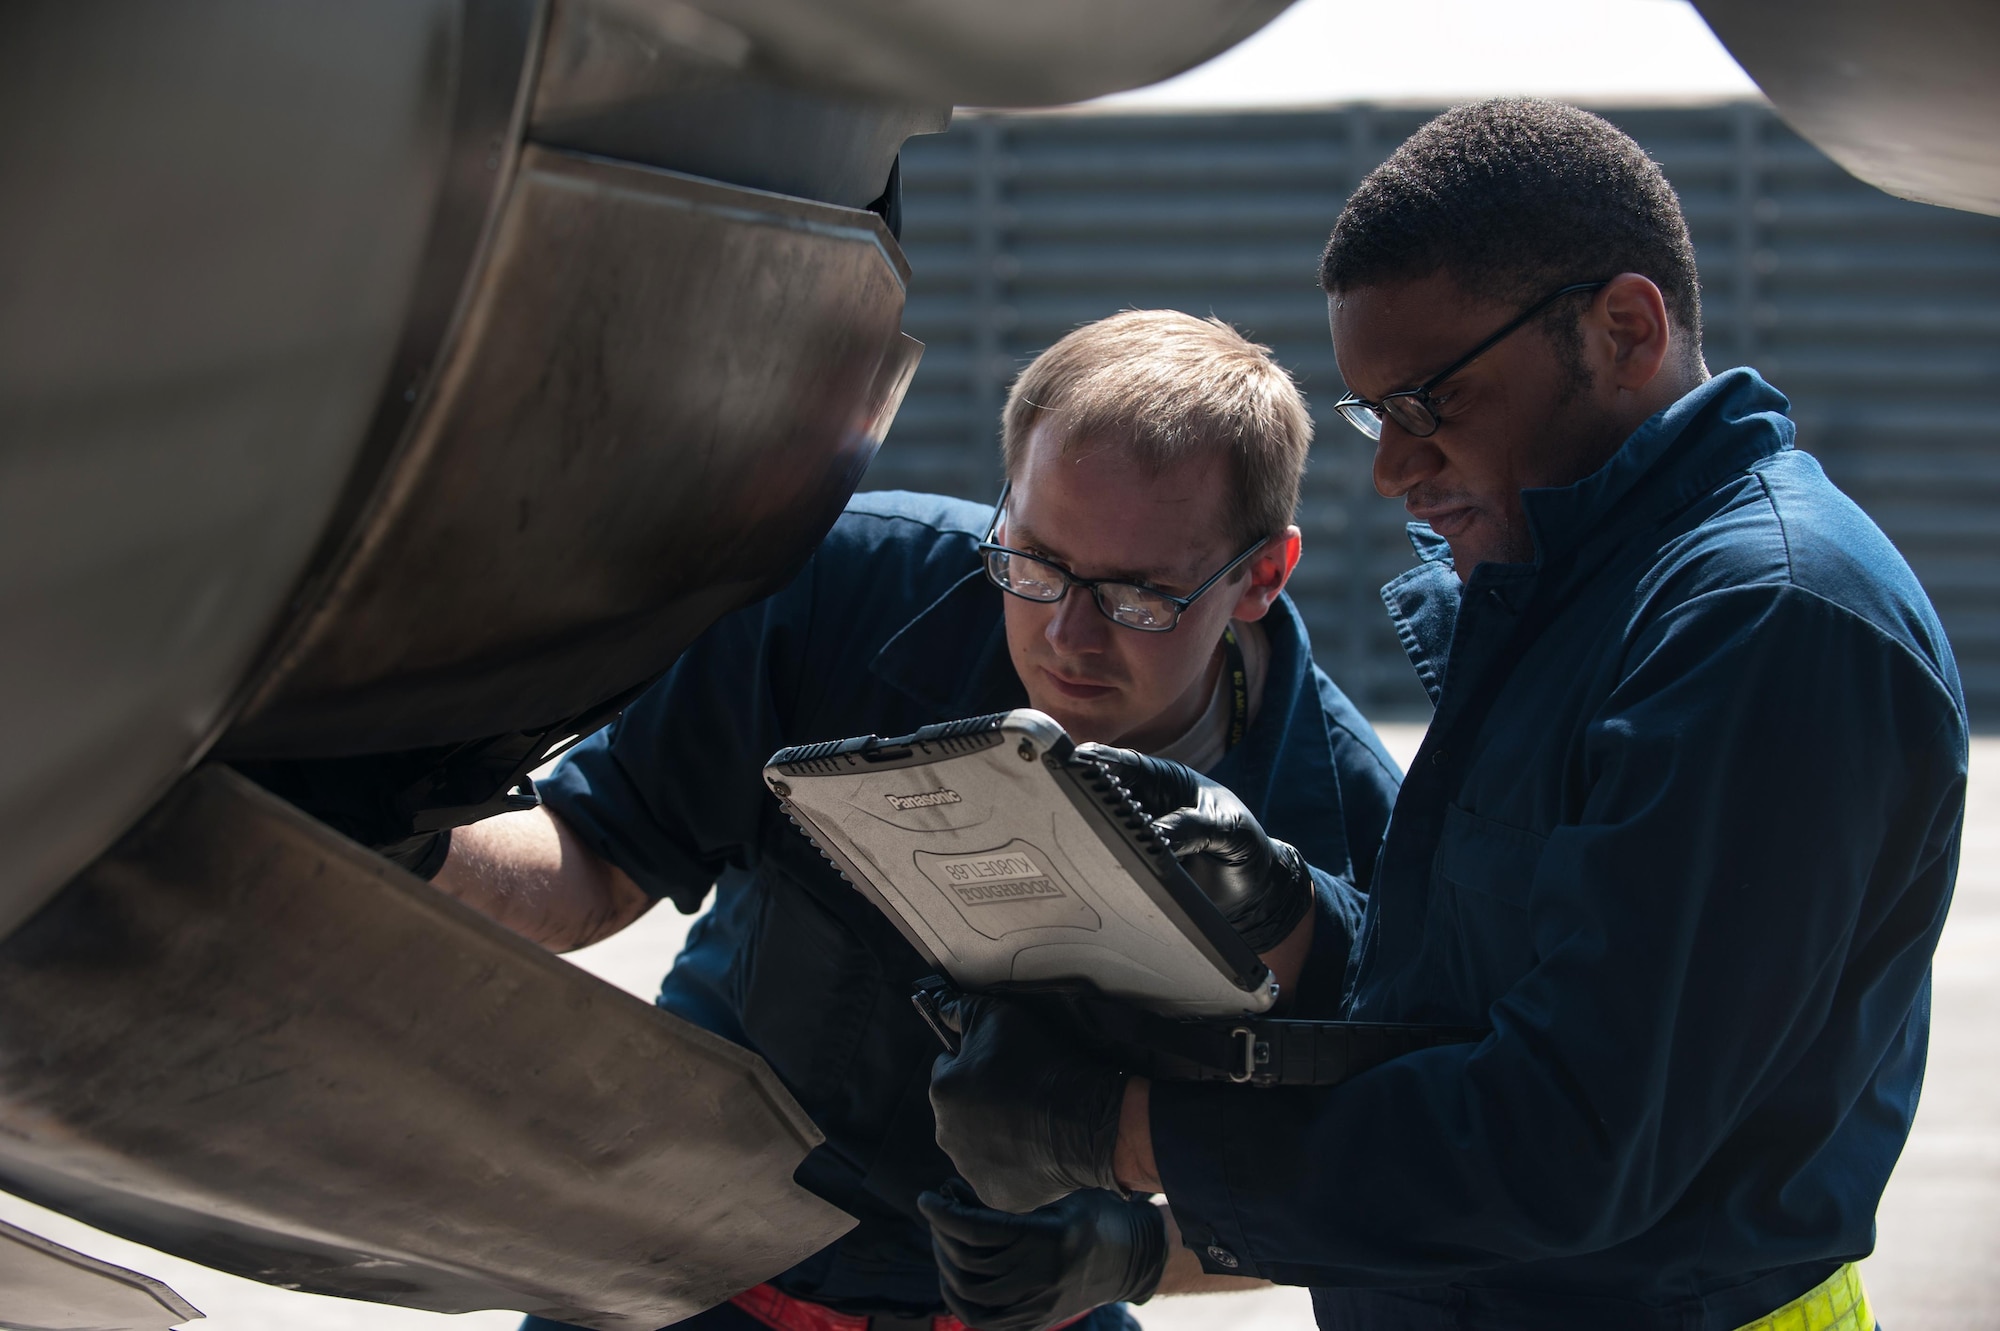 Staff Sgts. Christopher Conley and Bobby Reed, 8th Aircraft Maintenance Squadron jet engine mechanics, work on an F-16 Fighting Falcon during exercise Max Thunder 15-1 at Gwangju Air Base, South Korea, April 21, 2015. Max Thunder is a regularly scheduled training exercise designed to enhance the readiness of U.S. and South Korean air forces to defend South Korea. (U.S. Air Force photo/Senior Airman Taylor Curry)